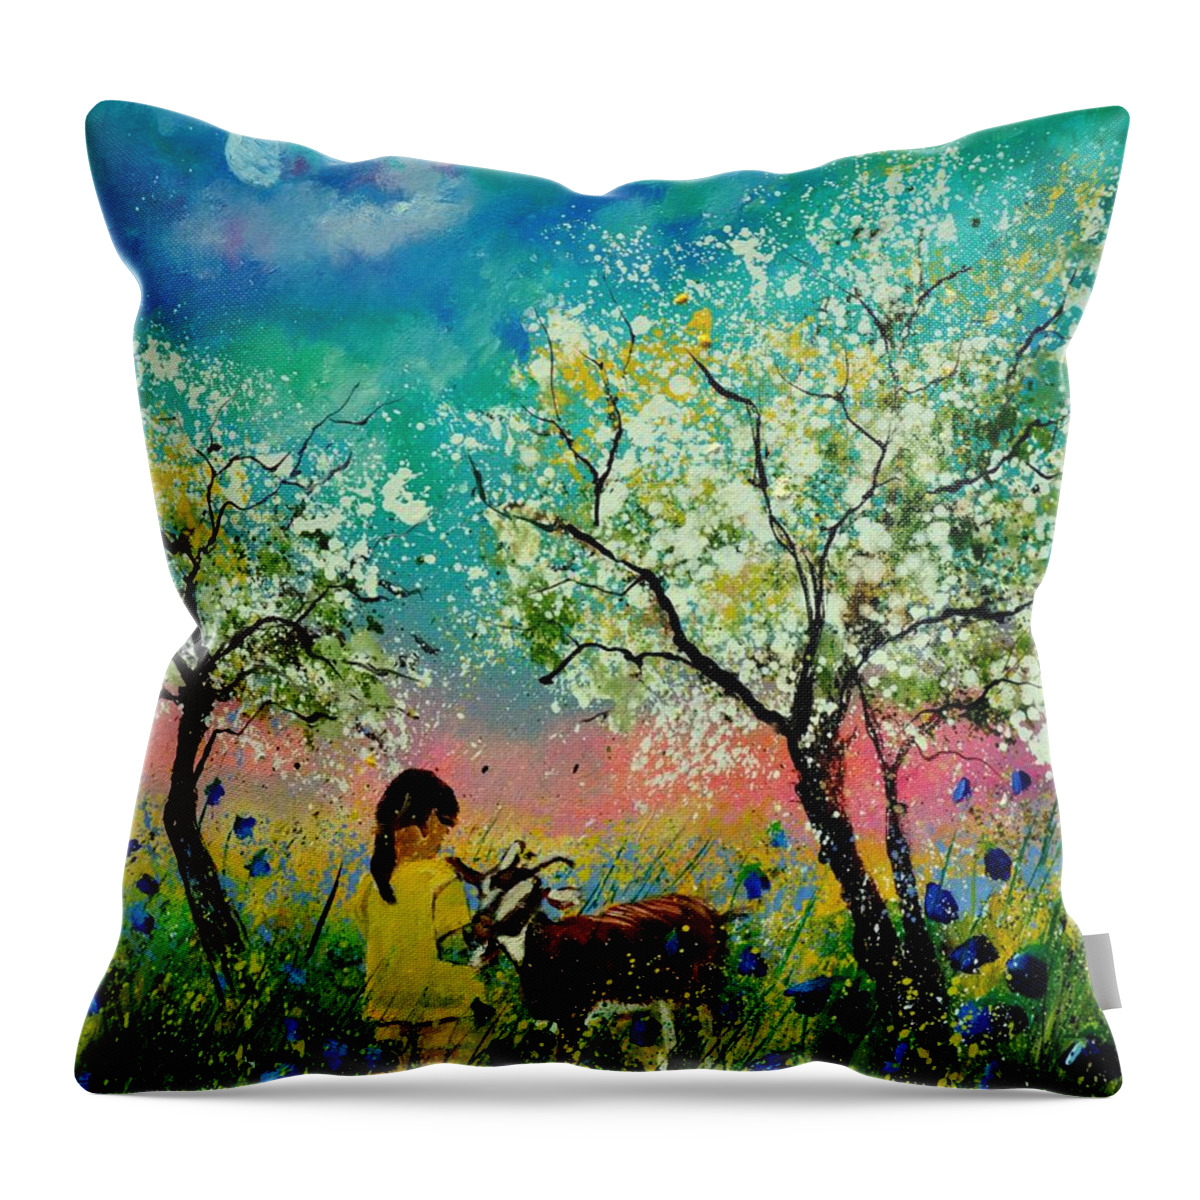 Landscape Throw Pillow featuring the painting In the orchard by Pol Ledent